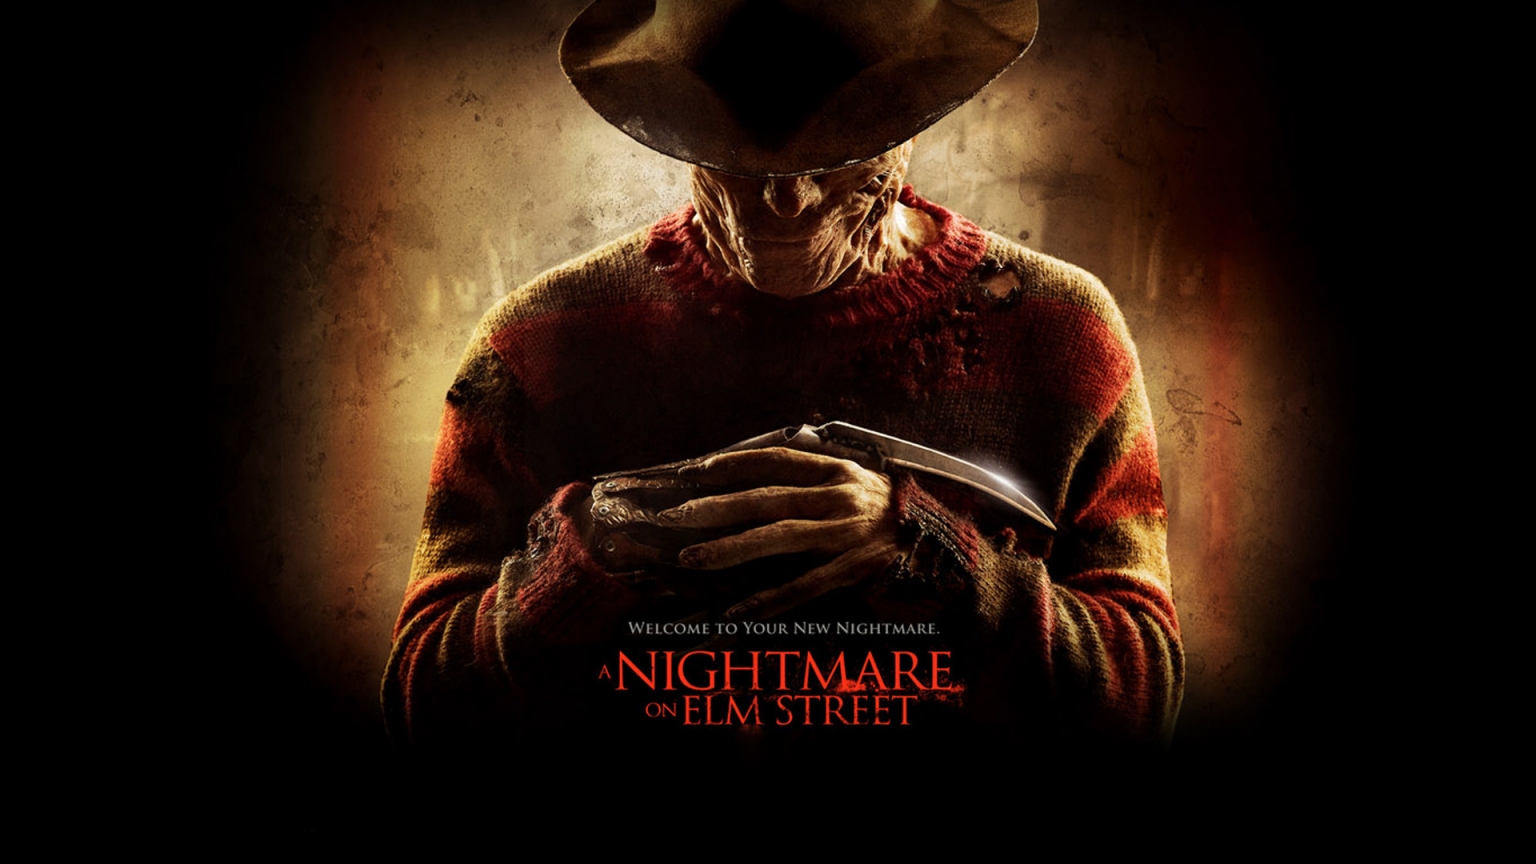 A Nightmare on Elm Street for 1536 x 864 HDTV resolution